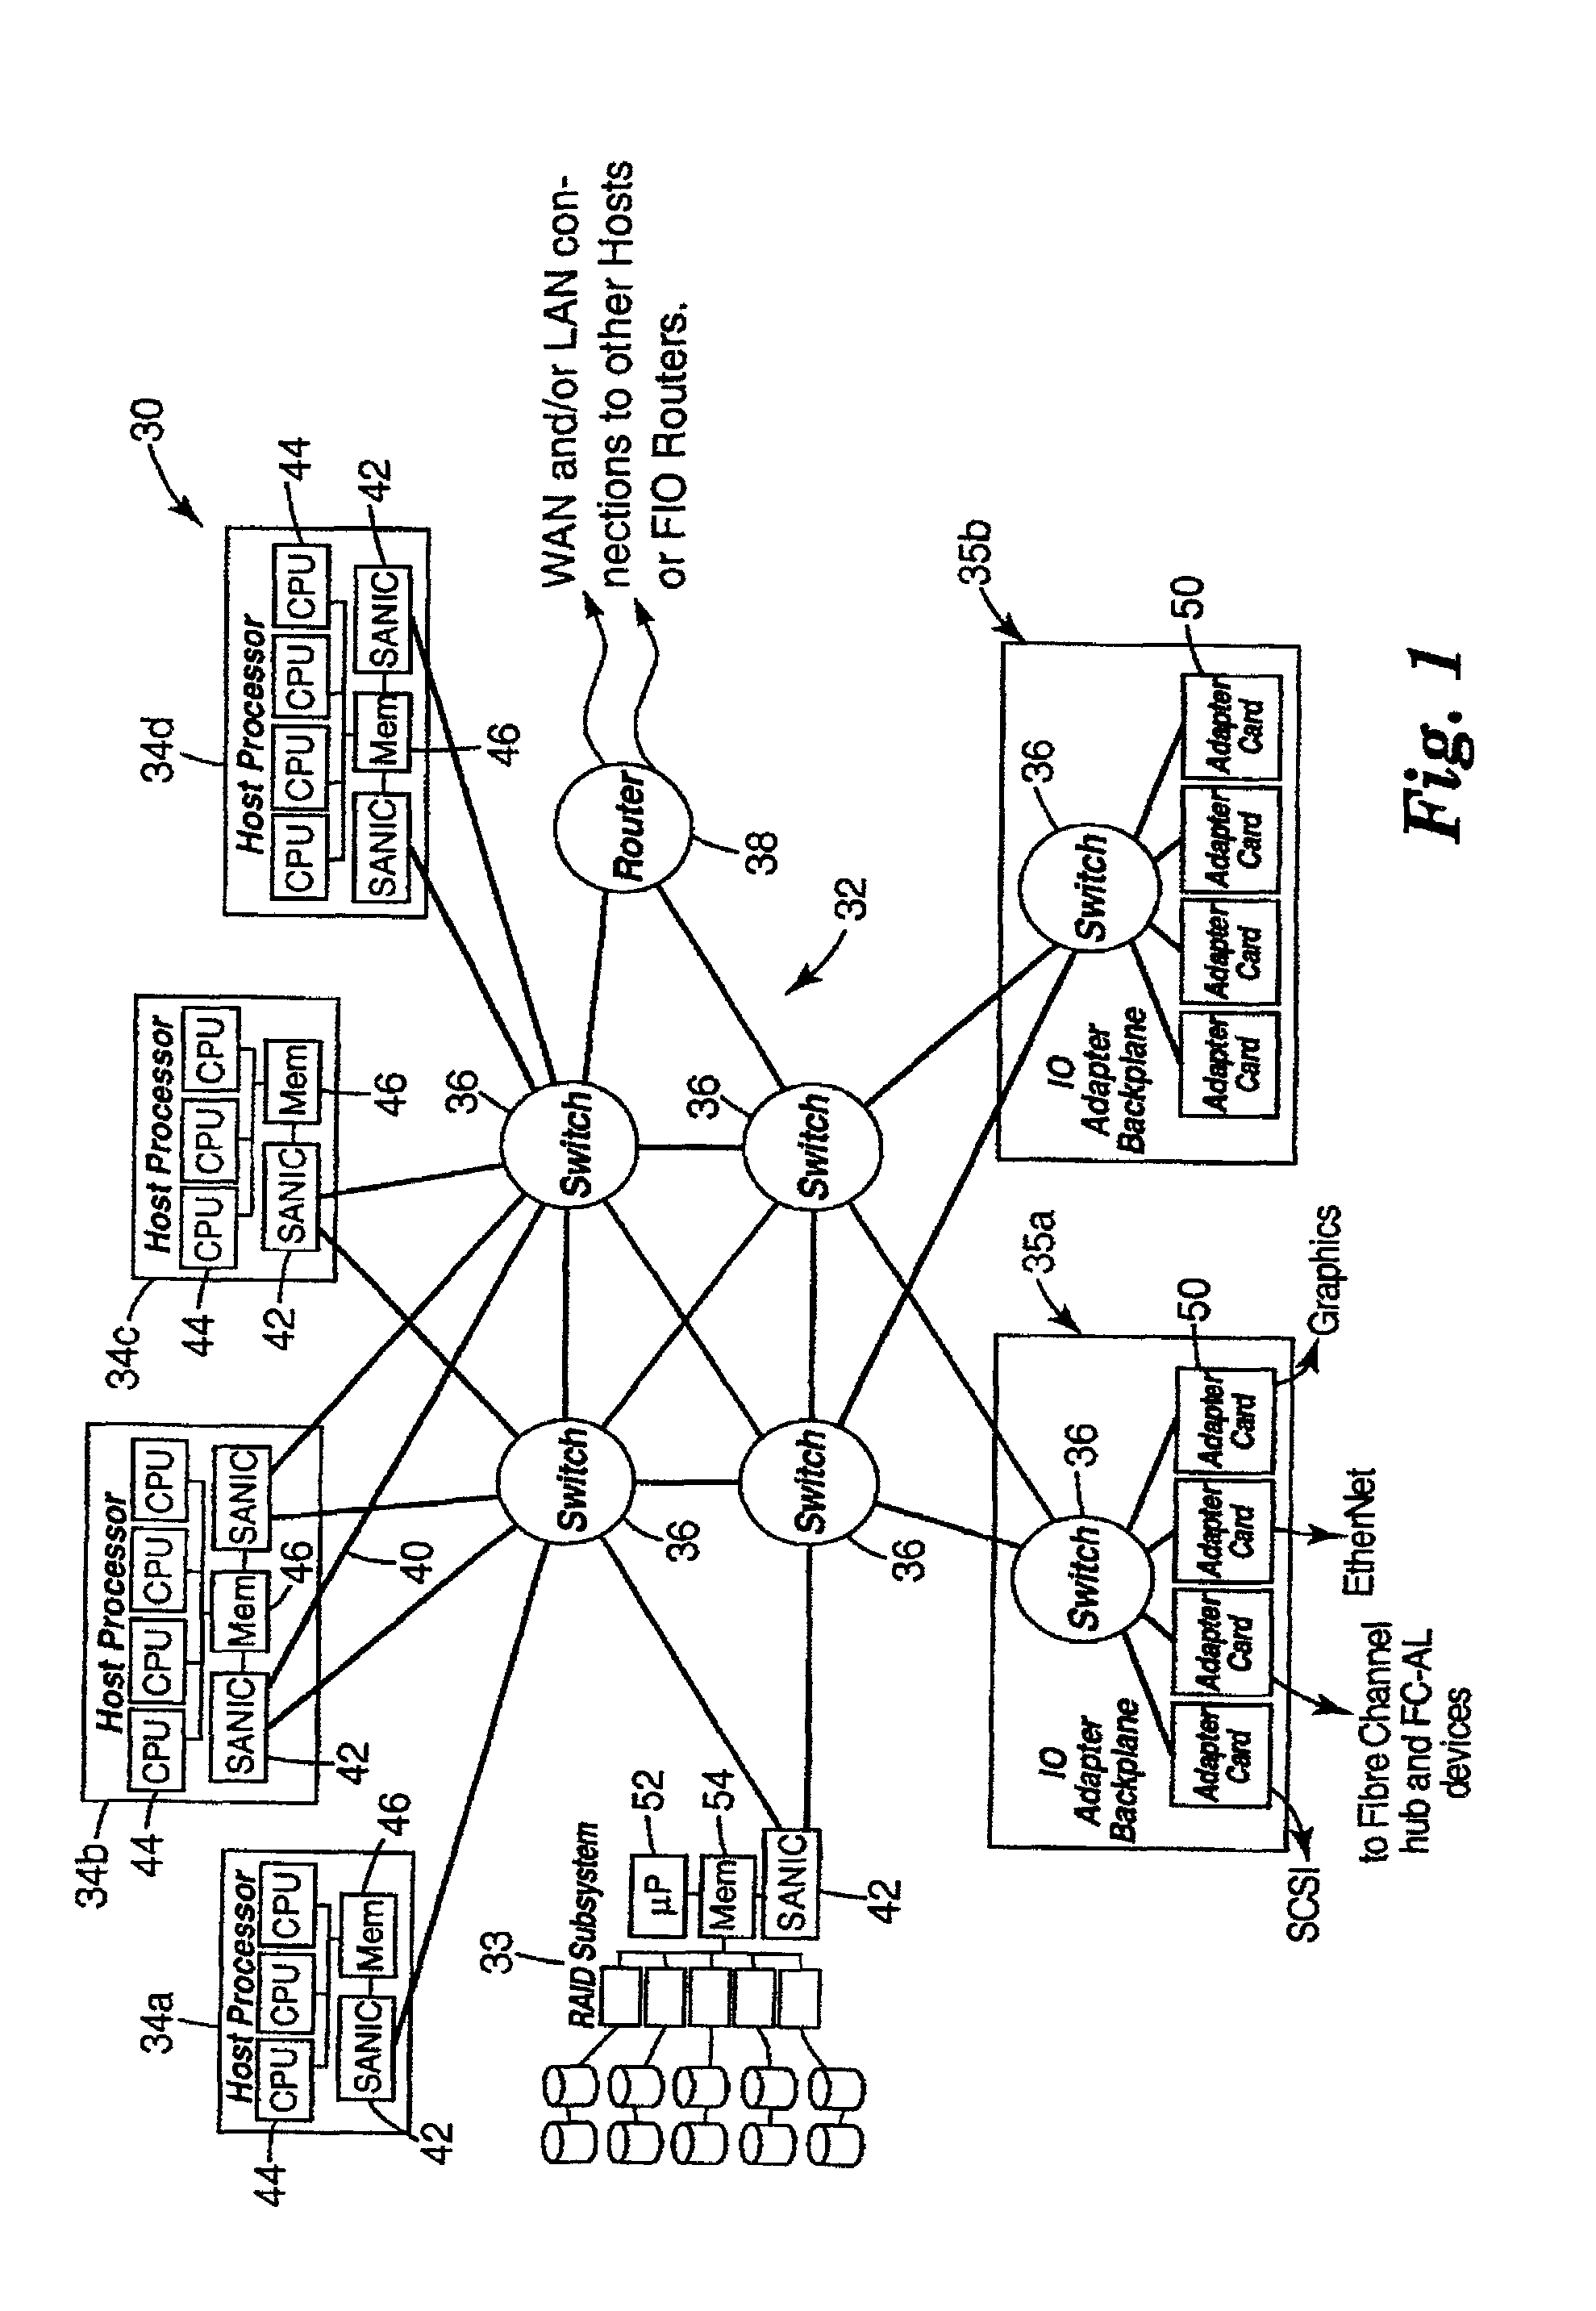 Congestion management in a distributed computer system multiplying current variable injection rate with a constant to set new variable injection rate at source node